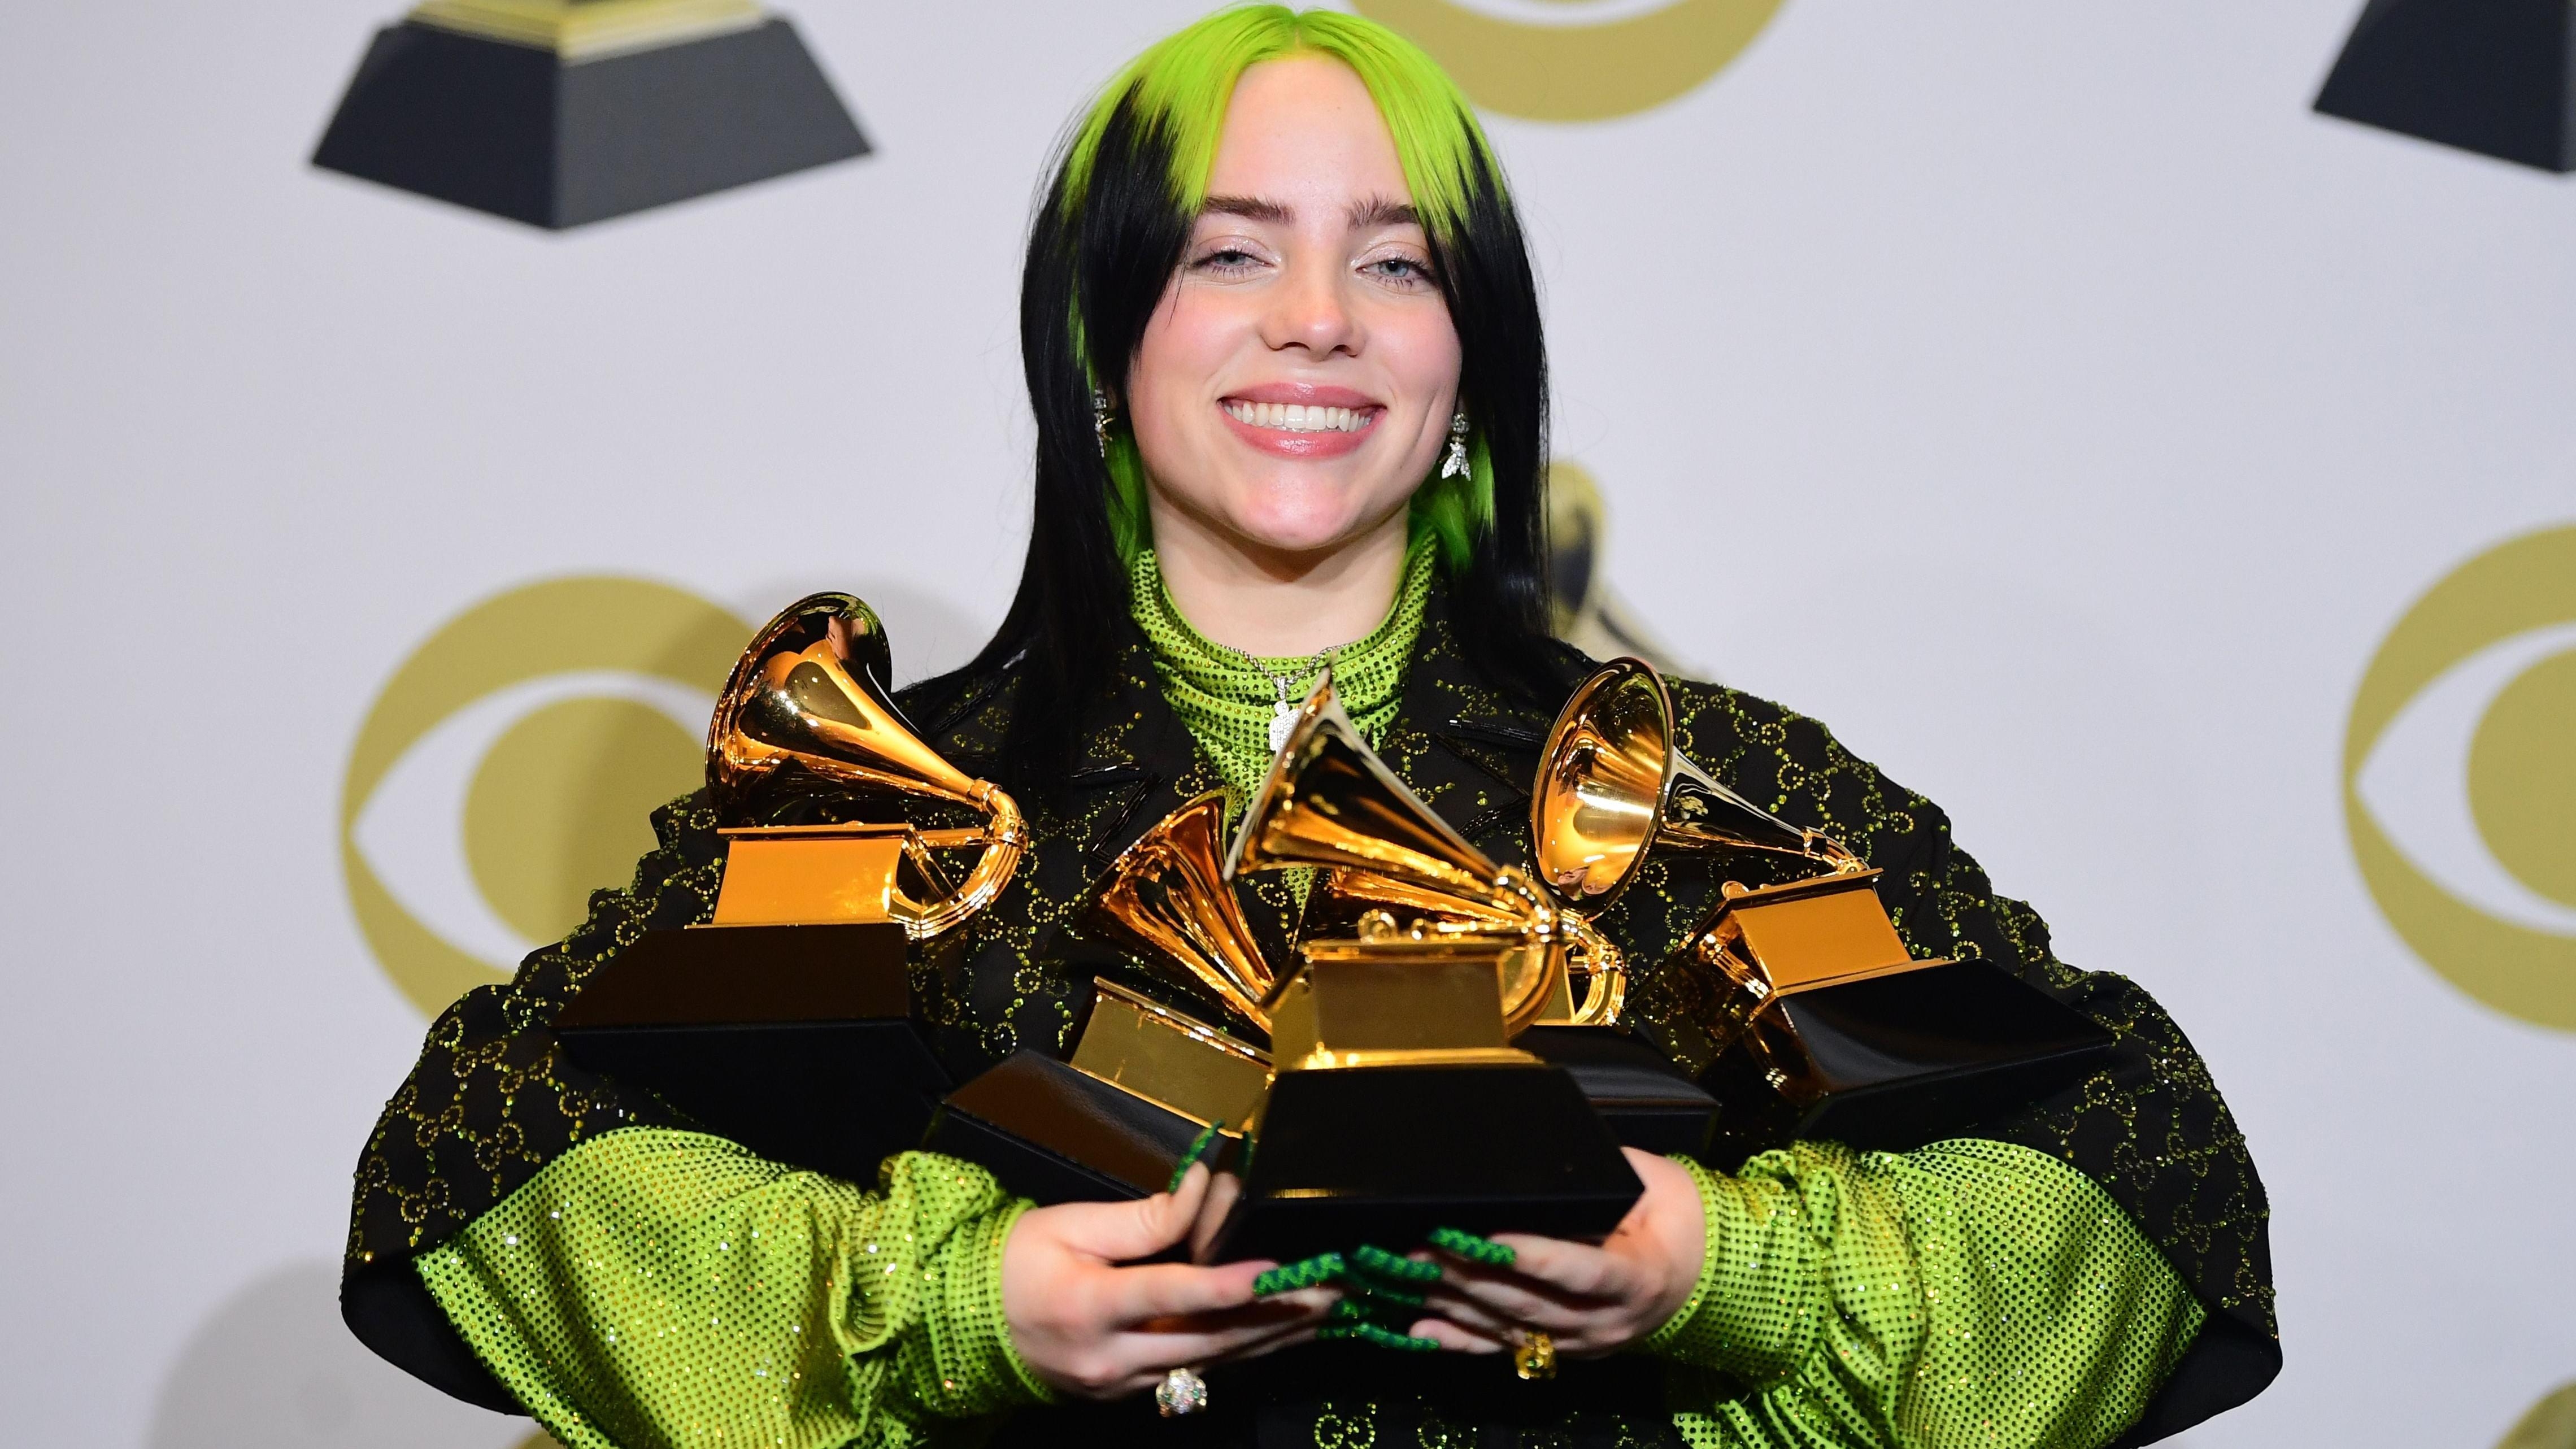 The 2022 Grammys will now be held in April